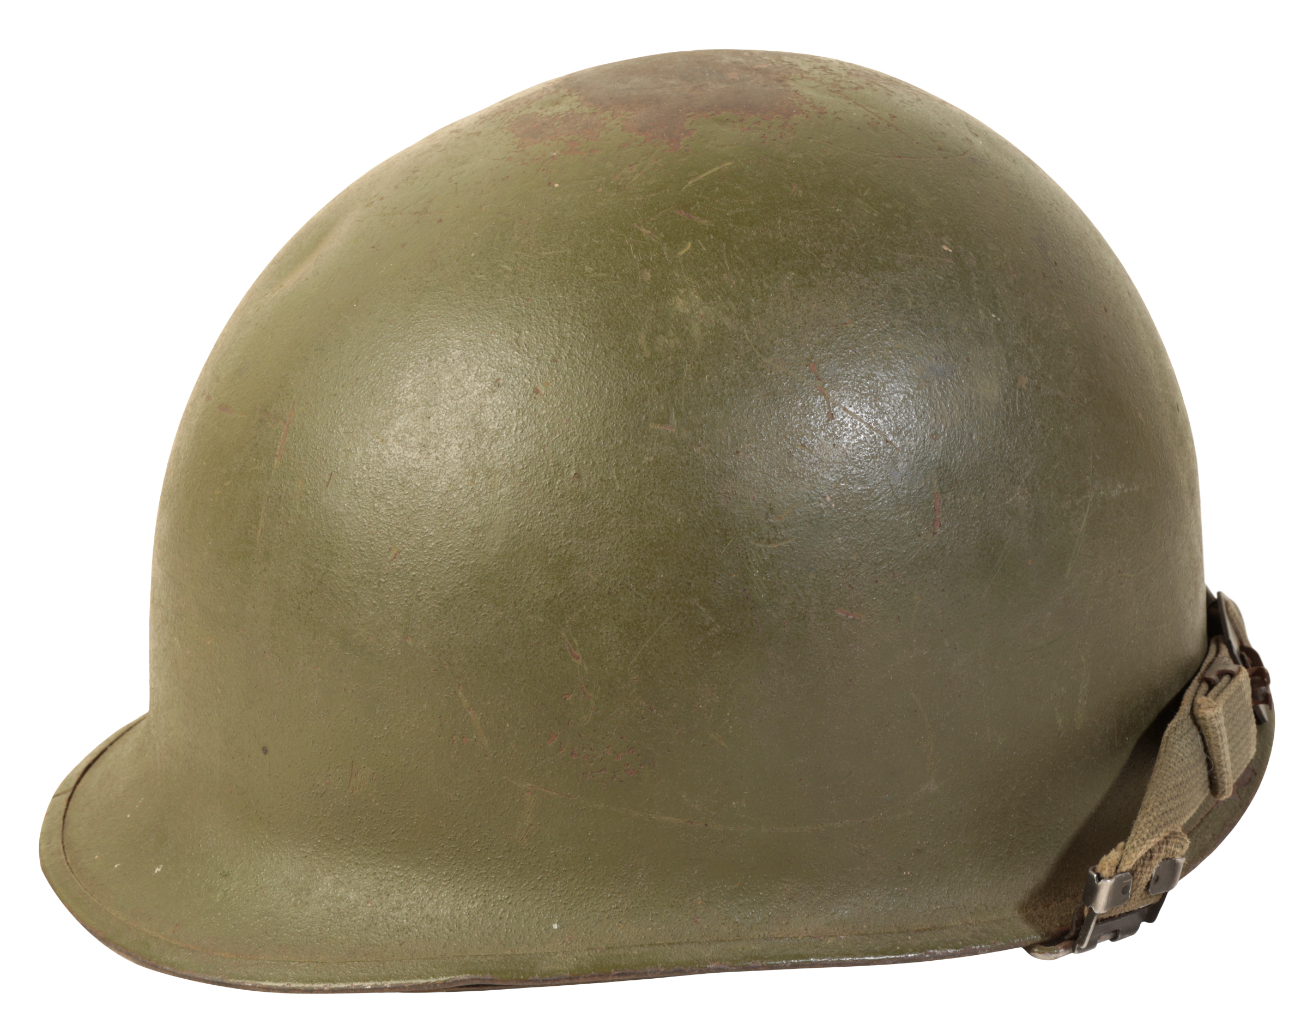 A WWII AMERICAN M1 HELMET with original